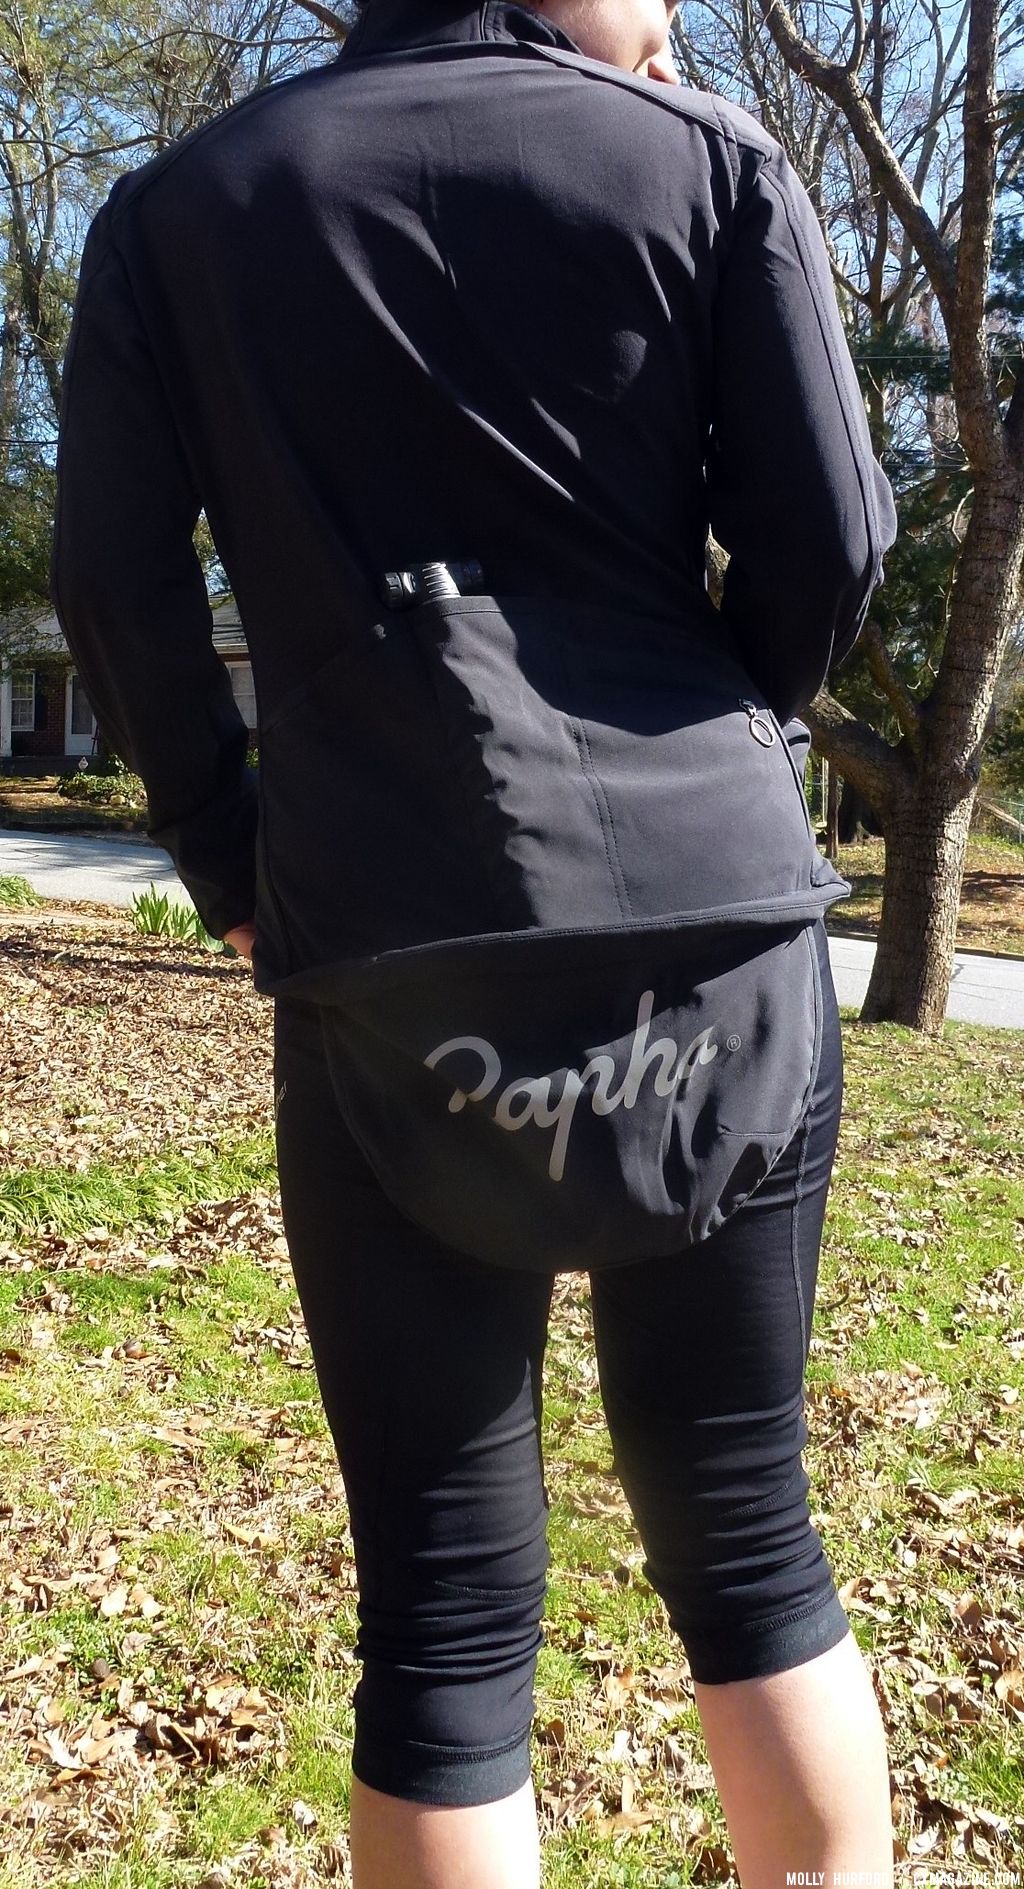 Clothing Review: Rapha Women's Classic Softshell Jacket 